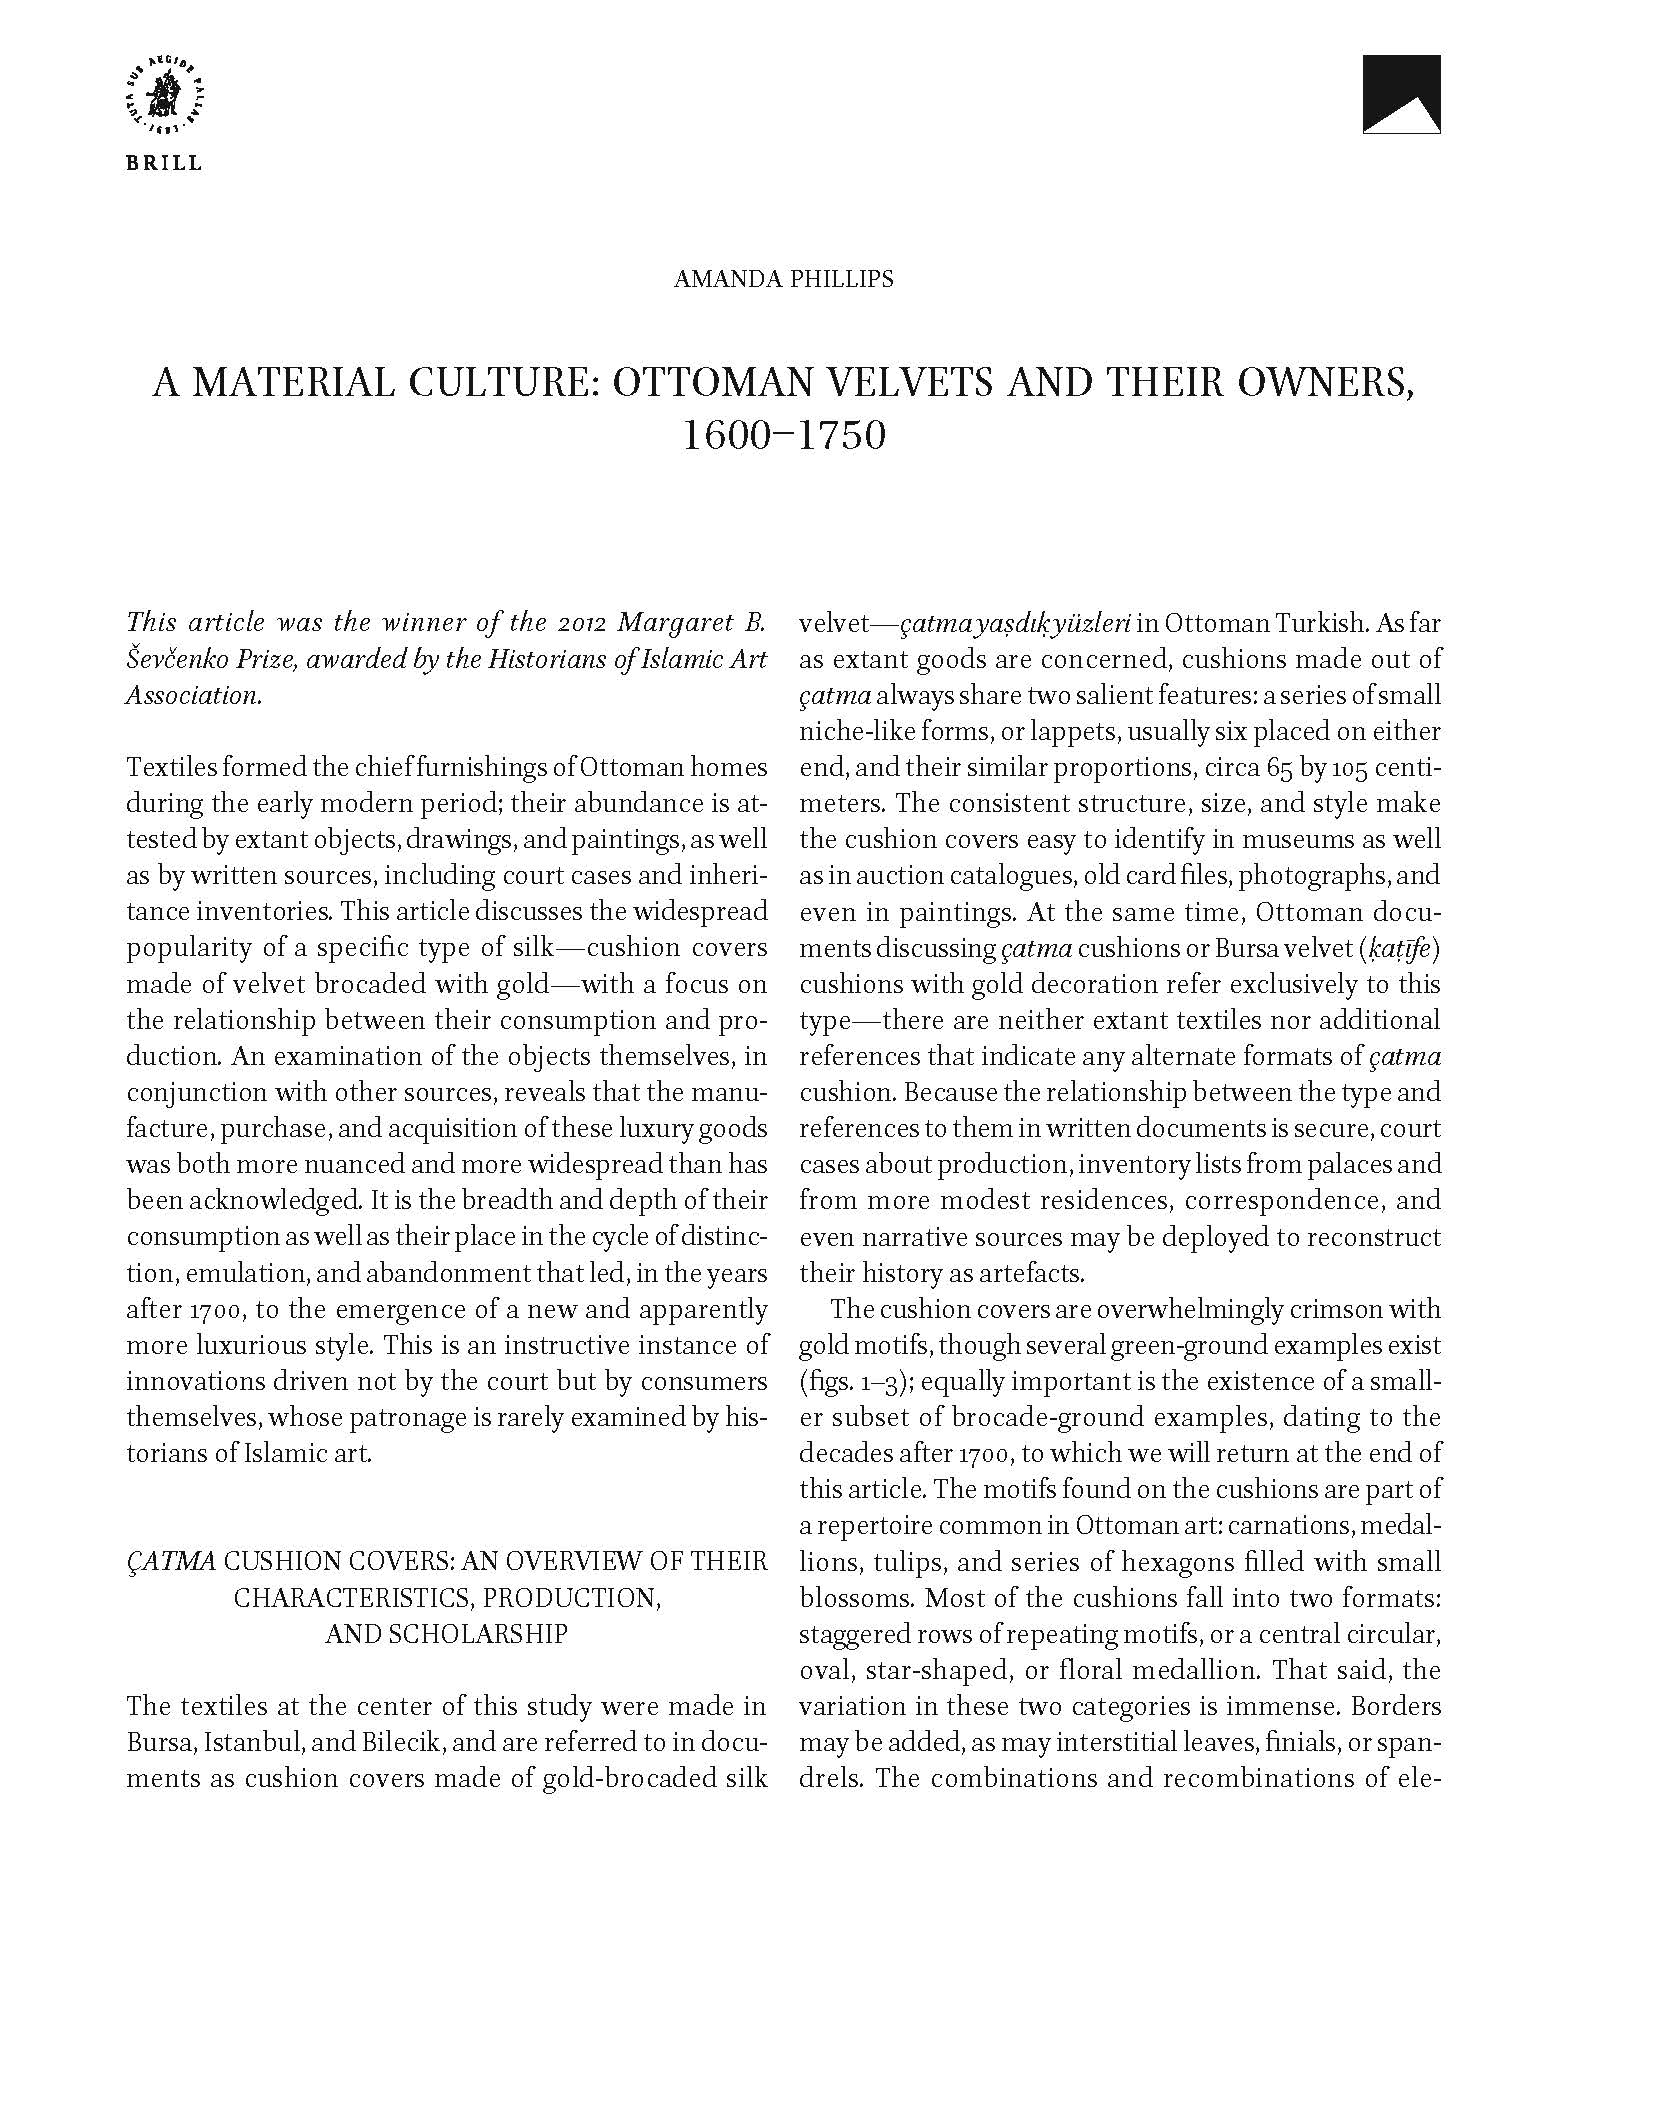 Amanda Phillips - <div style="text-align: justify;">This article traces changes in Ottoman voided and brocaded velvets (çatma) between the years of 1580 and 1740. It argues that demand for a distinctive type of cushion cover—which became an emblem of refined taste—substantially changed the nature of silk production in the weaving center of Bursa. Using estate inventories to trace the quantities and prices of çatma cushion covers, several trends emerge, the most significant being an increasing range of prices for the same category of textile and a sudden jump in çatma prices for the years after 1720 or so. Moreover, through technical analysis of extant çatmas, the agility with which the weavers diversified their production becomes clear. Finally, analysis coupled with price history also reveals a surprising fact: the new, elegant, and apparently sought-after style of çatma cushion cover commanded a higher price but cost less to weave.</div>